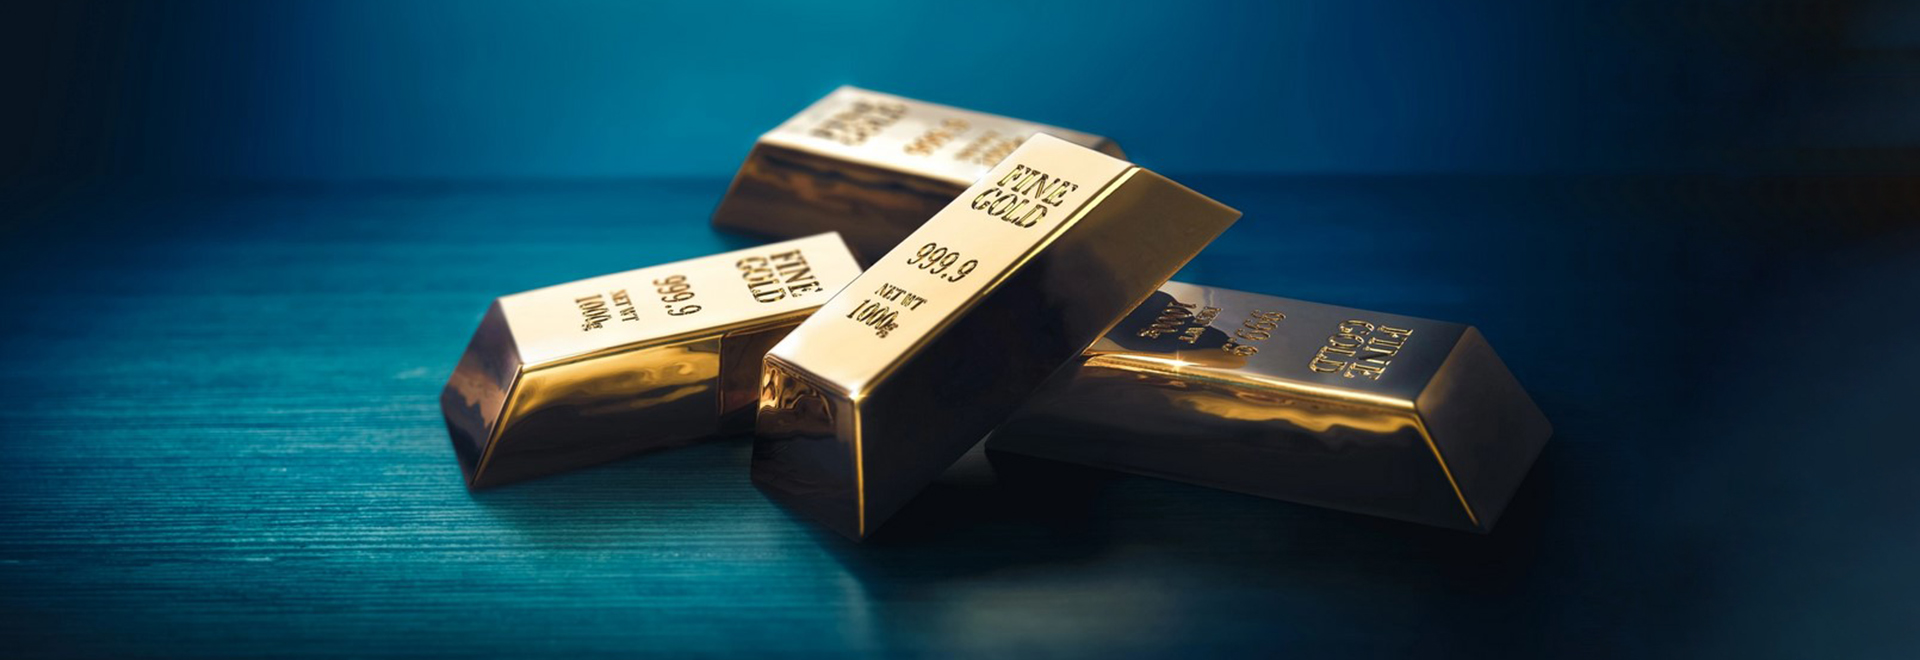 Gold Tends To Attract Increased Demand